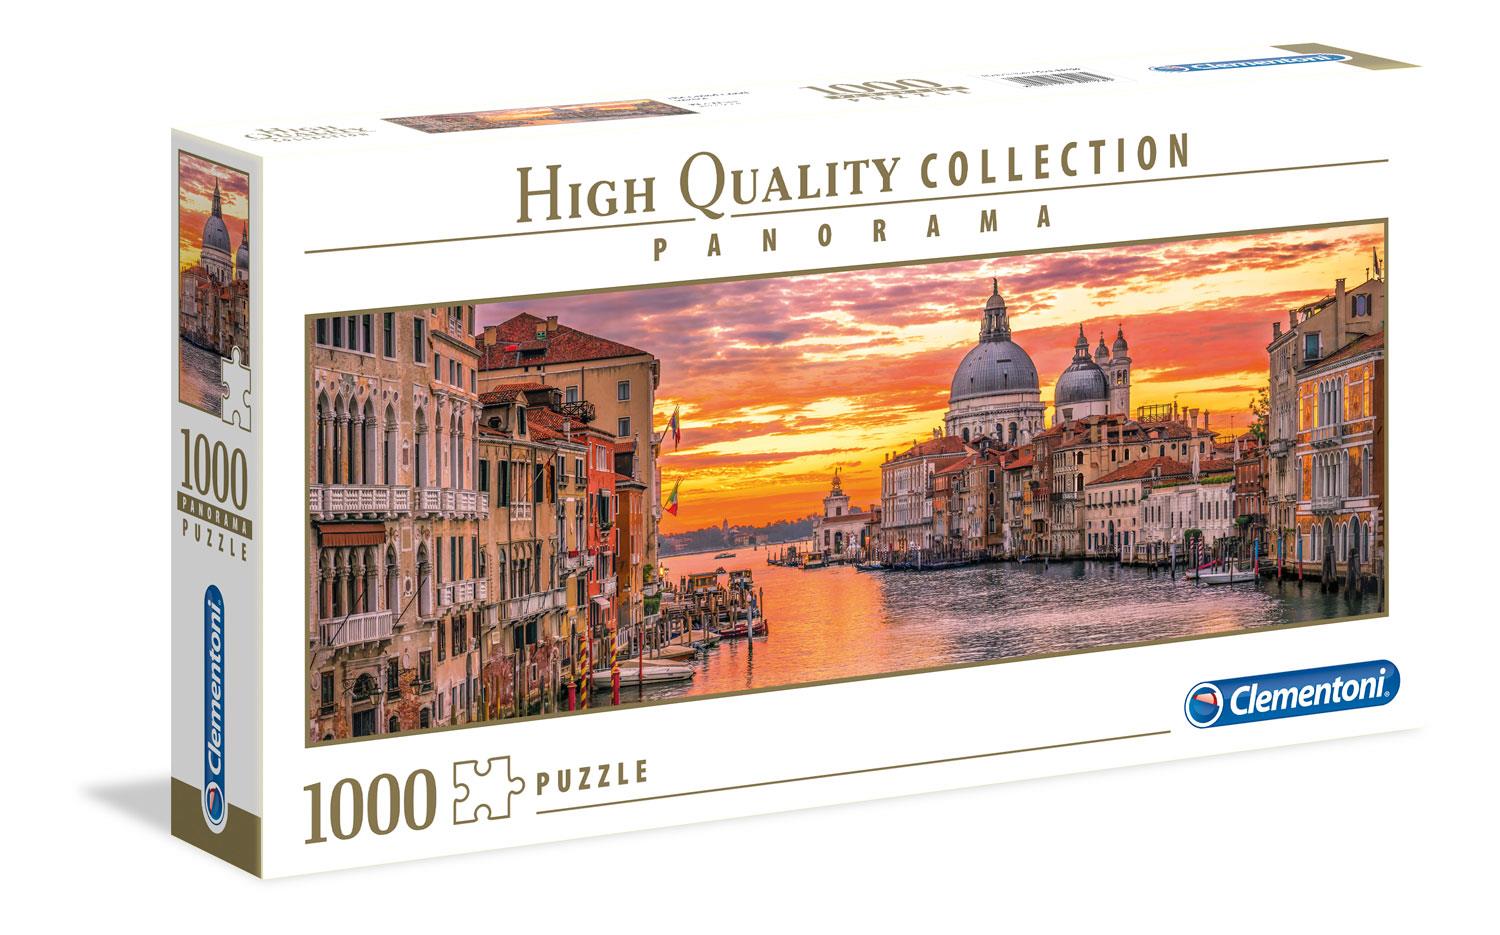 High quality Collection Disney 1000 Piece Clementoni Panorama